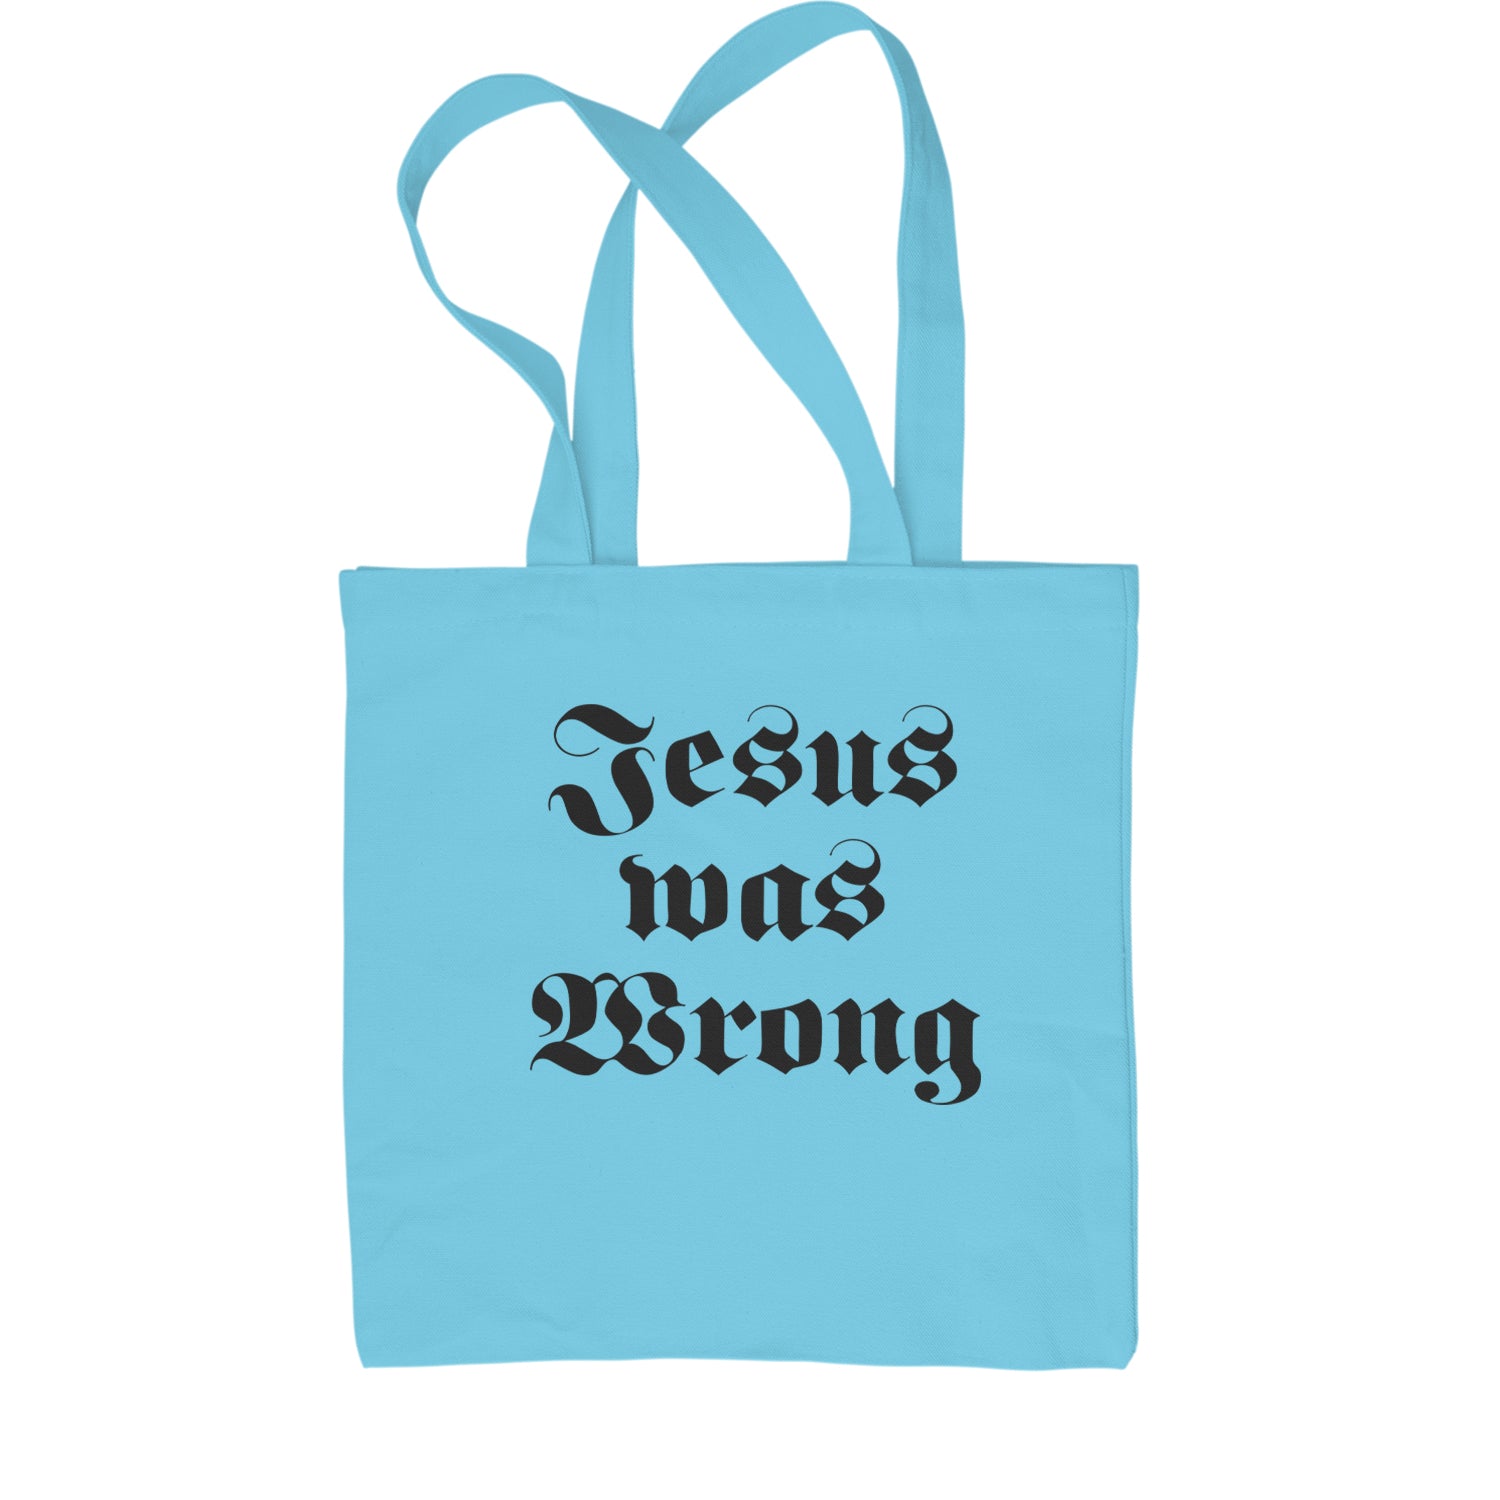 Jesus Was Wrong Little Miss Sunshine Shopping Tote Bag breslin, dano, movie, paul, shine, shirt, sun by Expression Tees